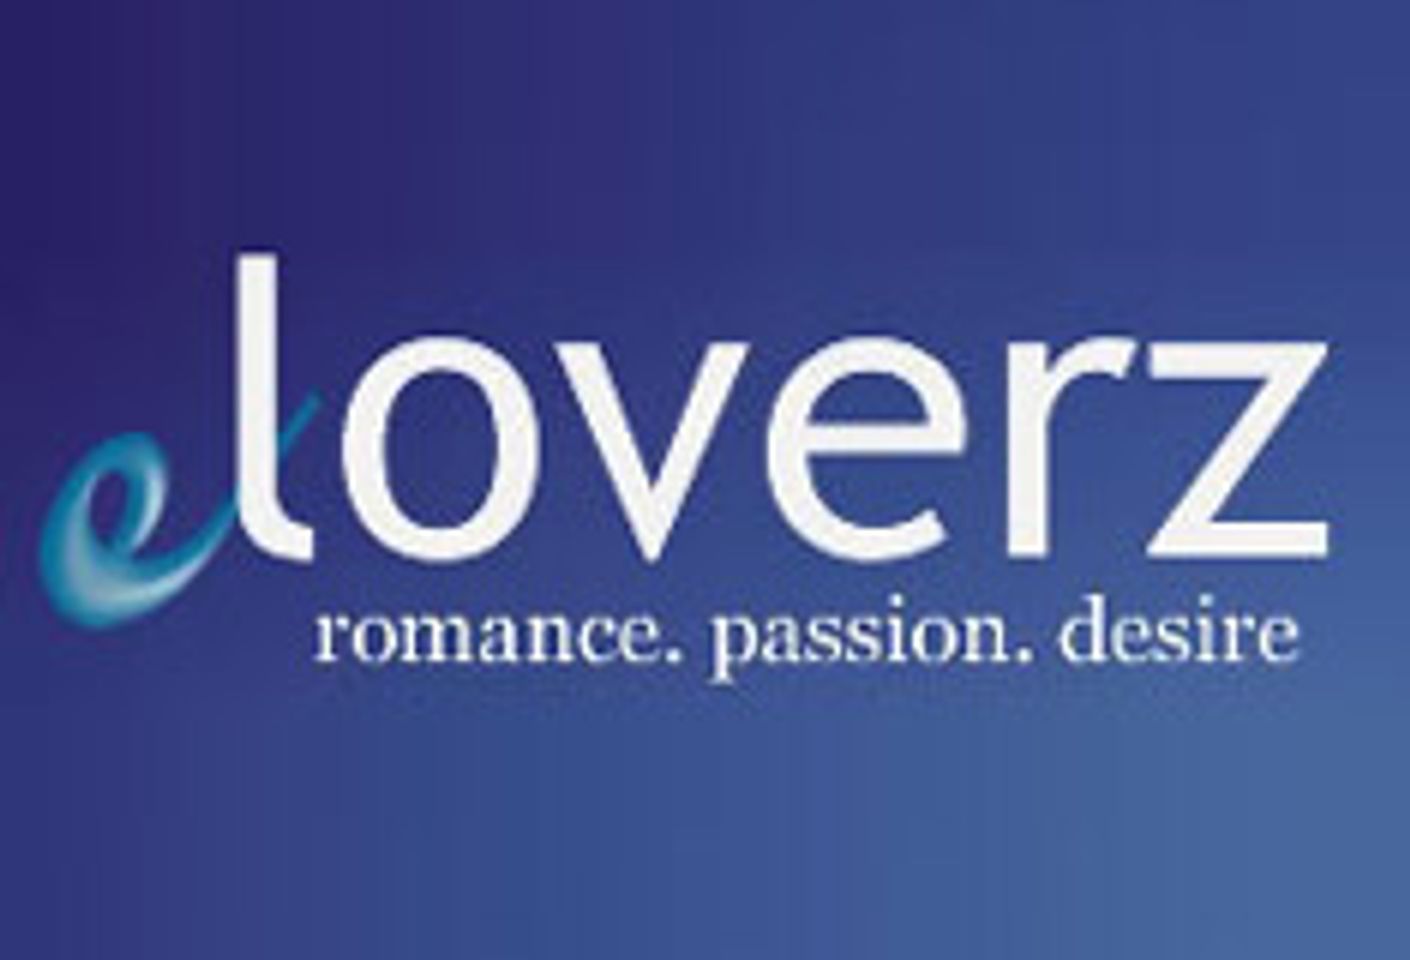 ELoverz.com Launches New Dating Sites